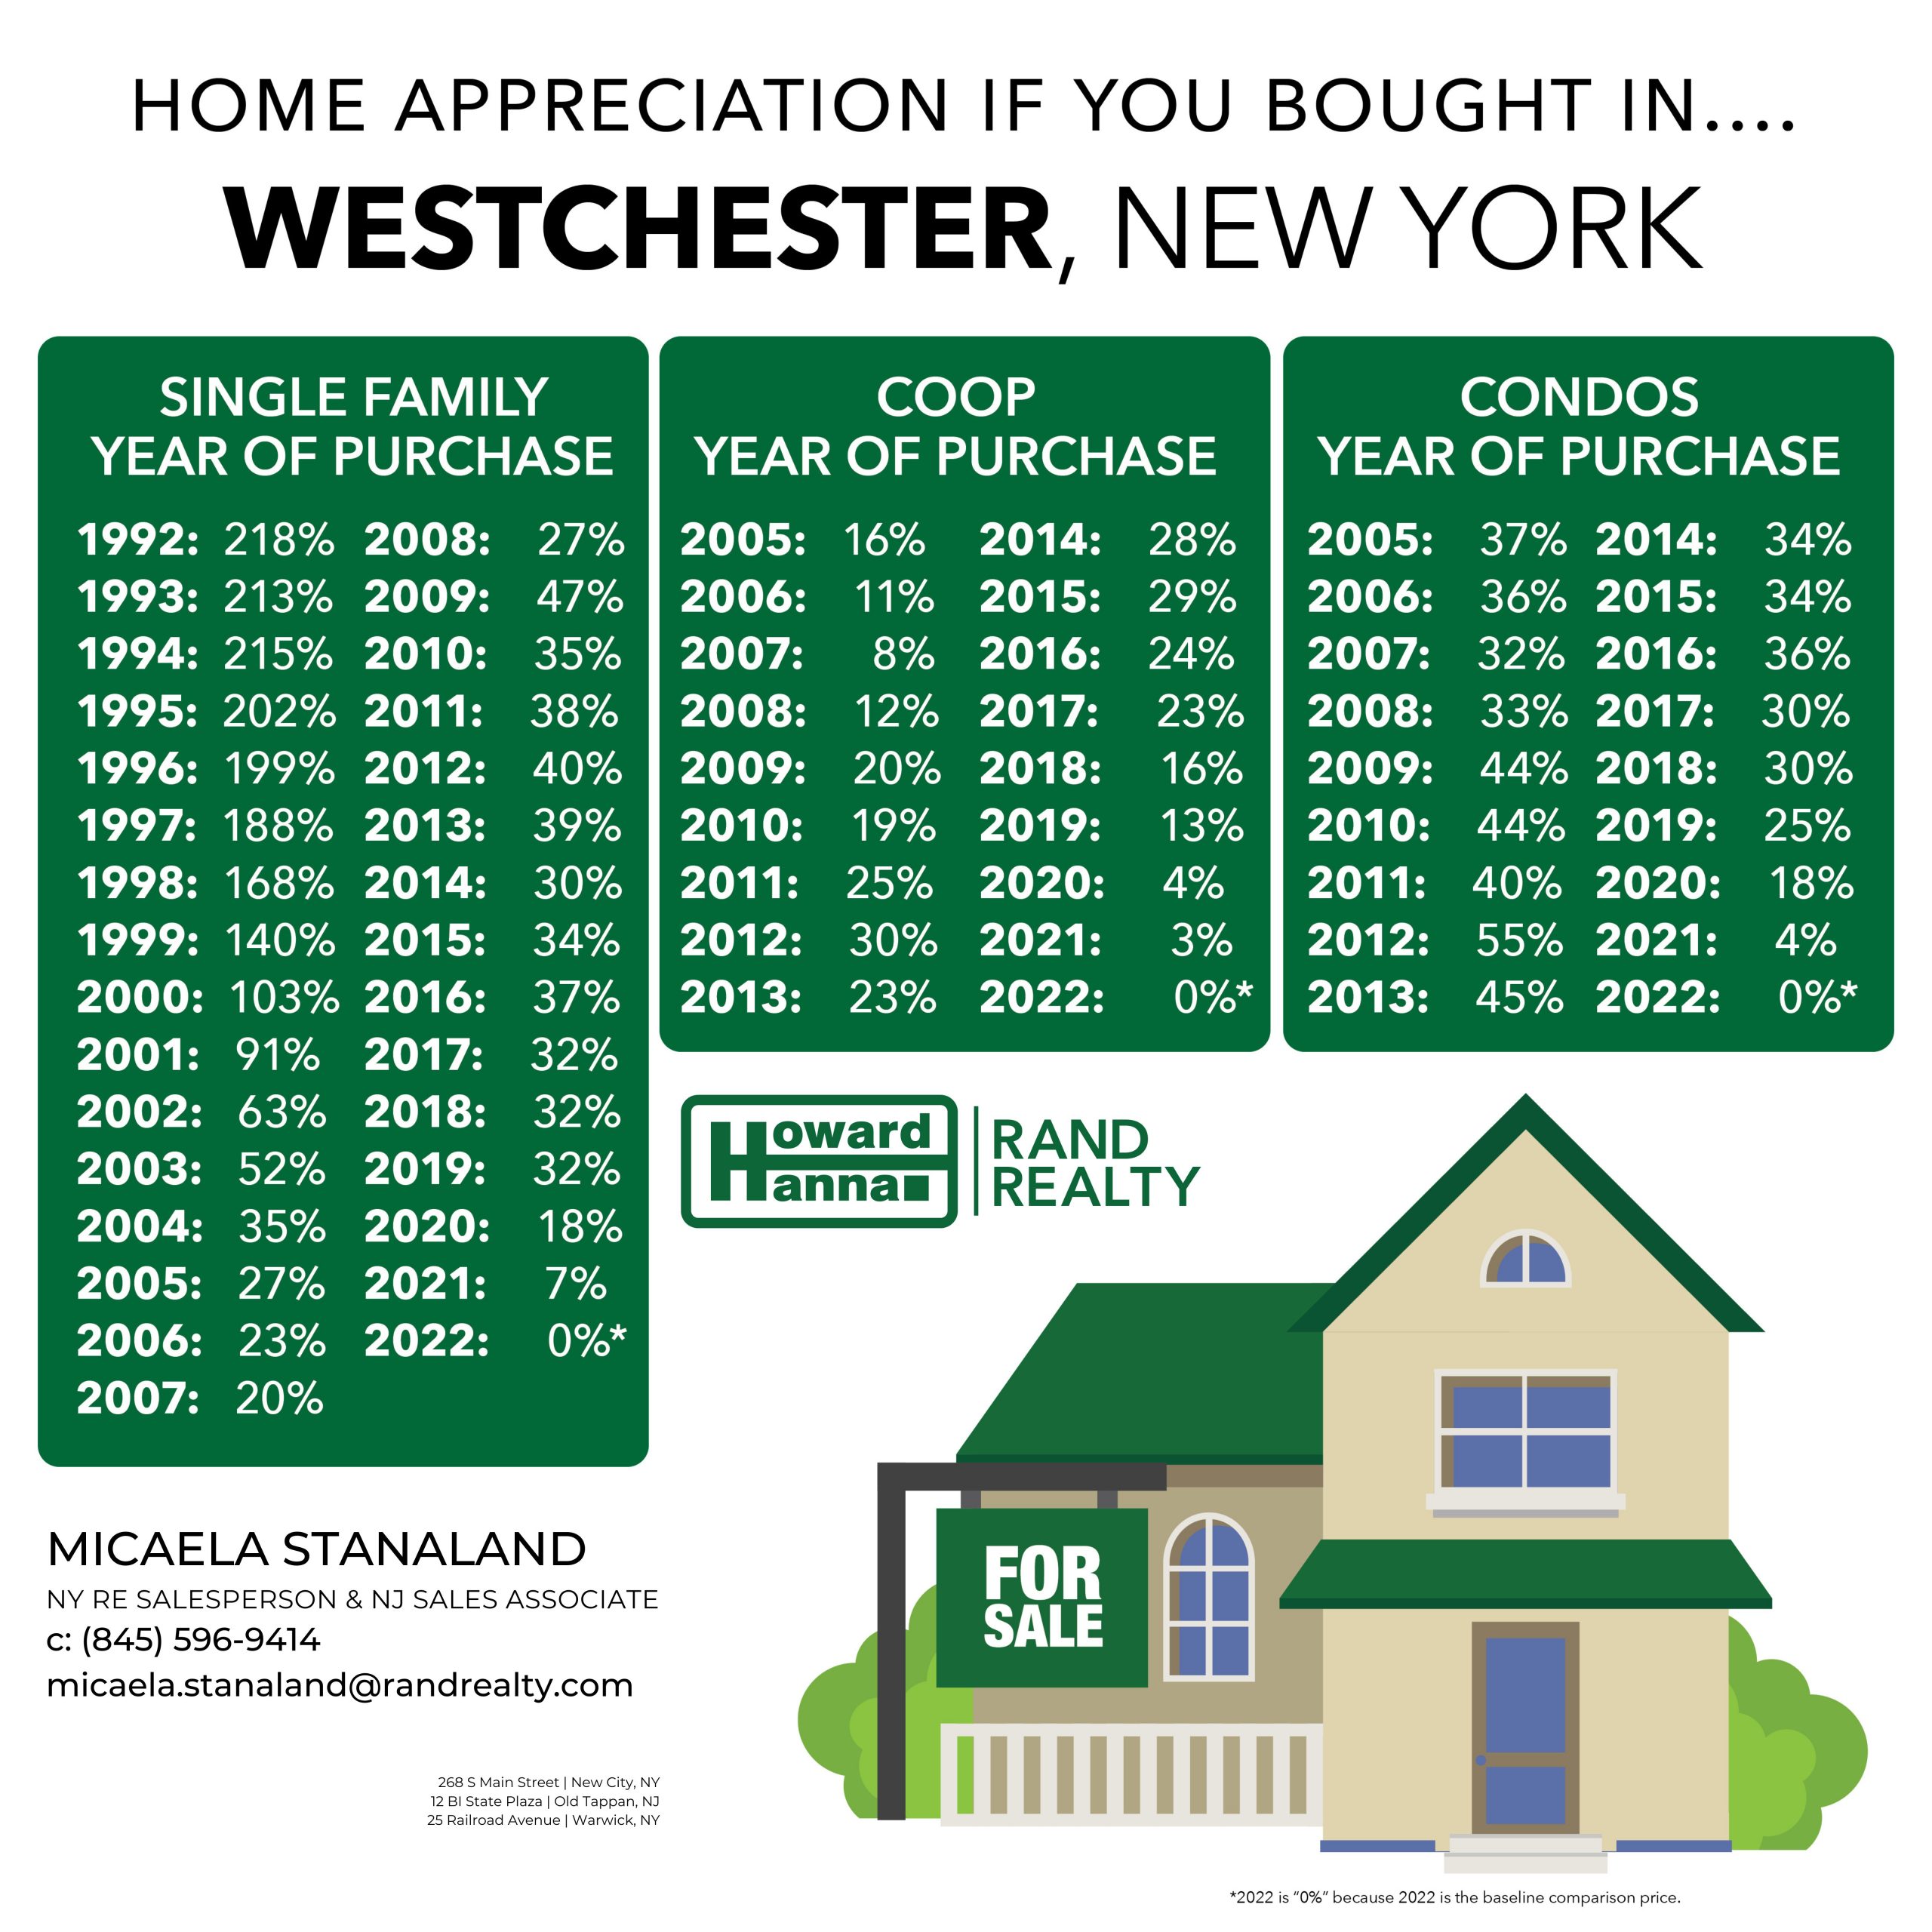 Home value appreciation for Westchester County, New York